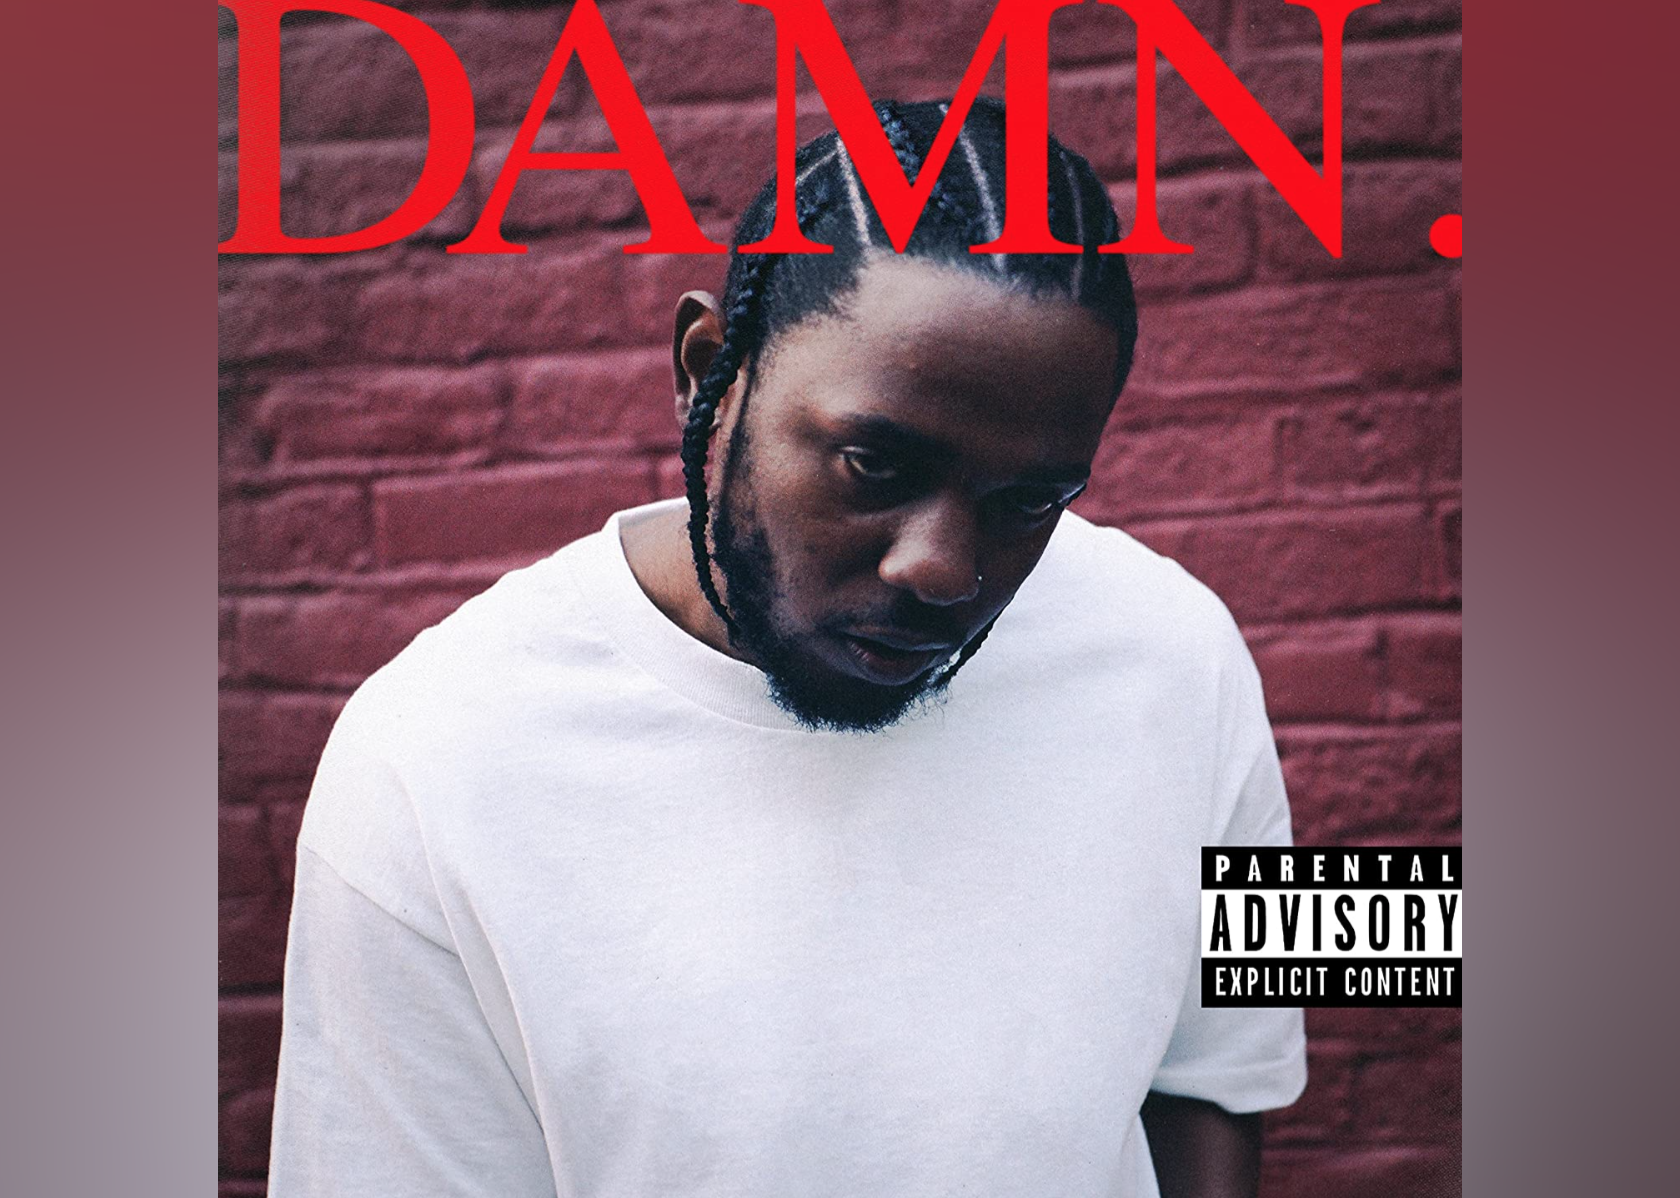 Kendrick Lamar in a white shirt with red writing on top of the album.